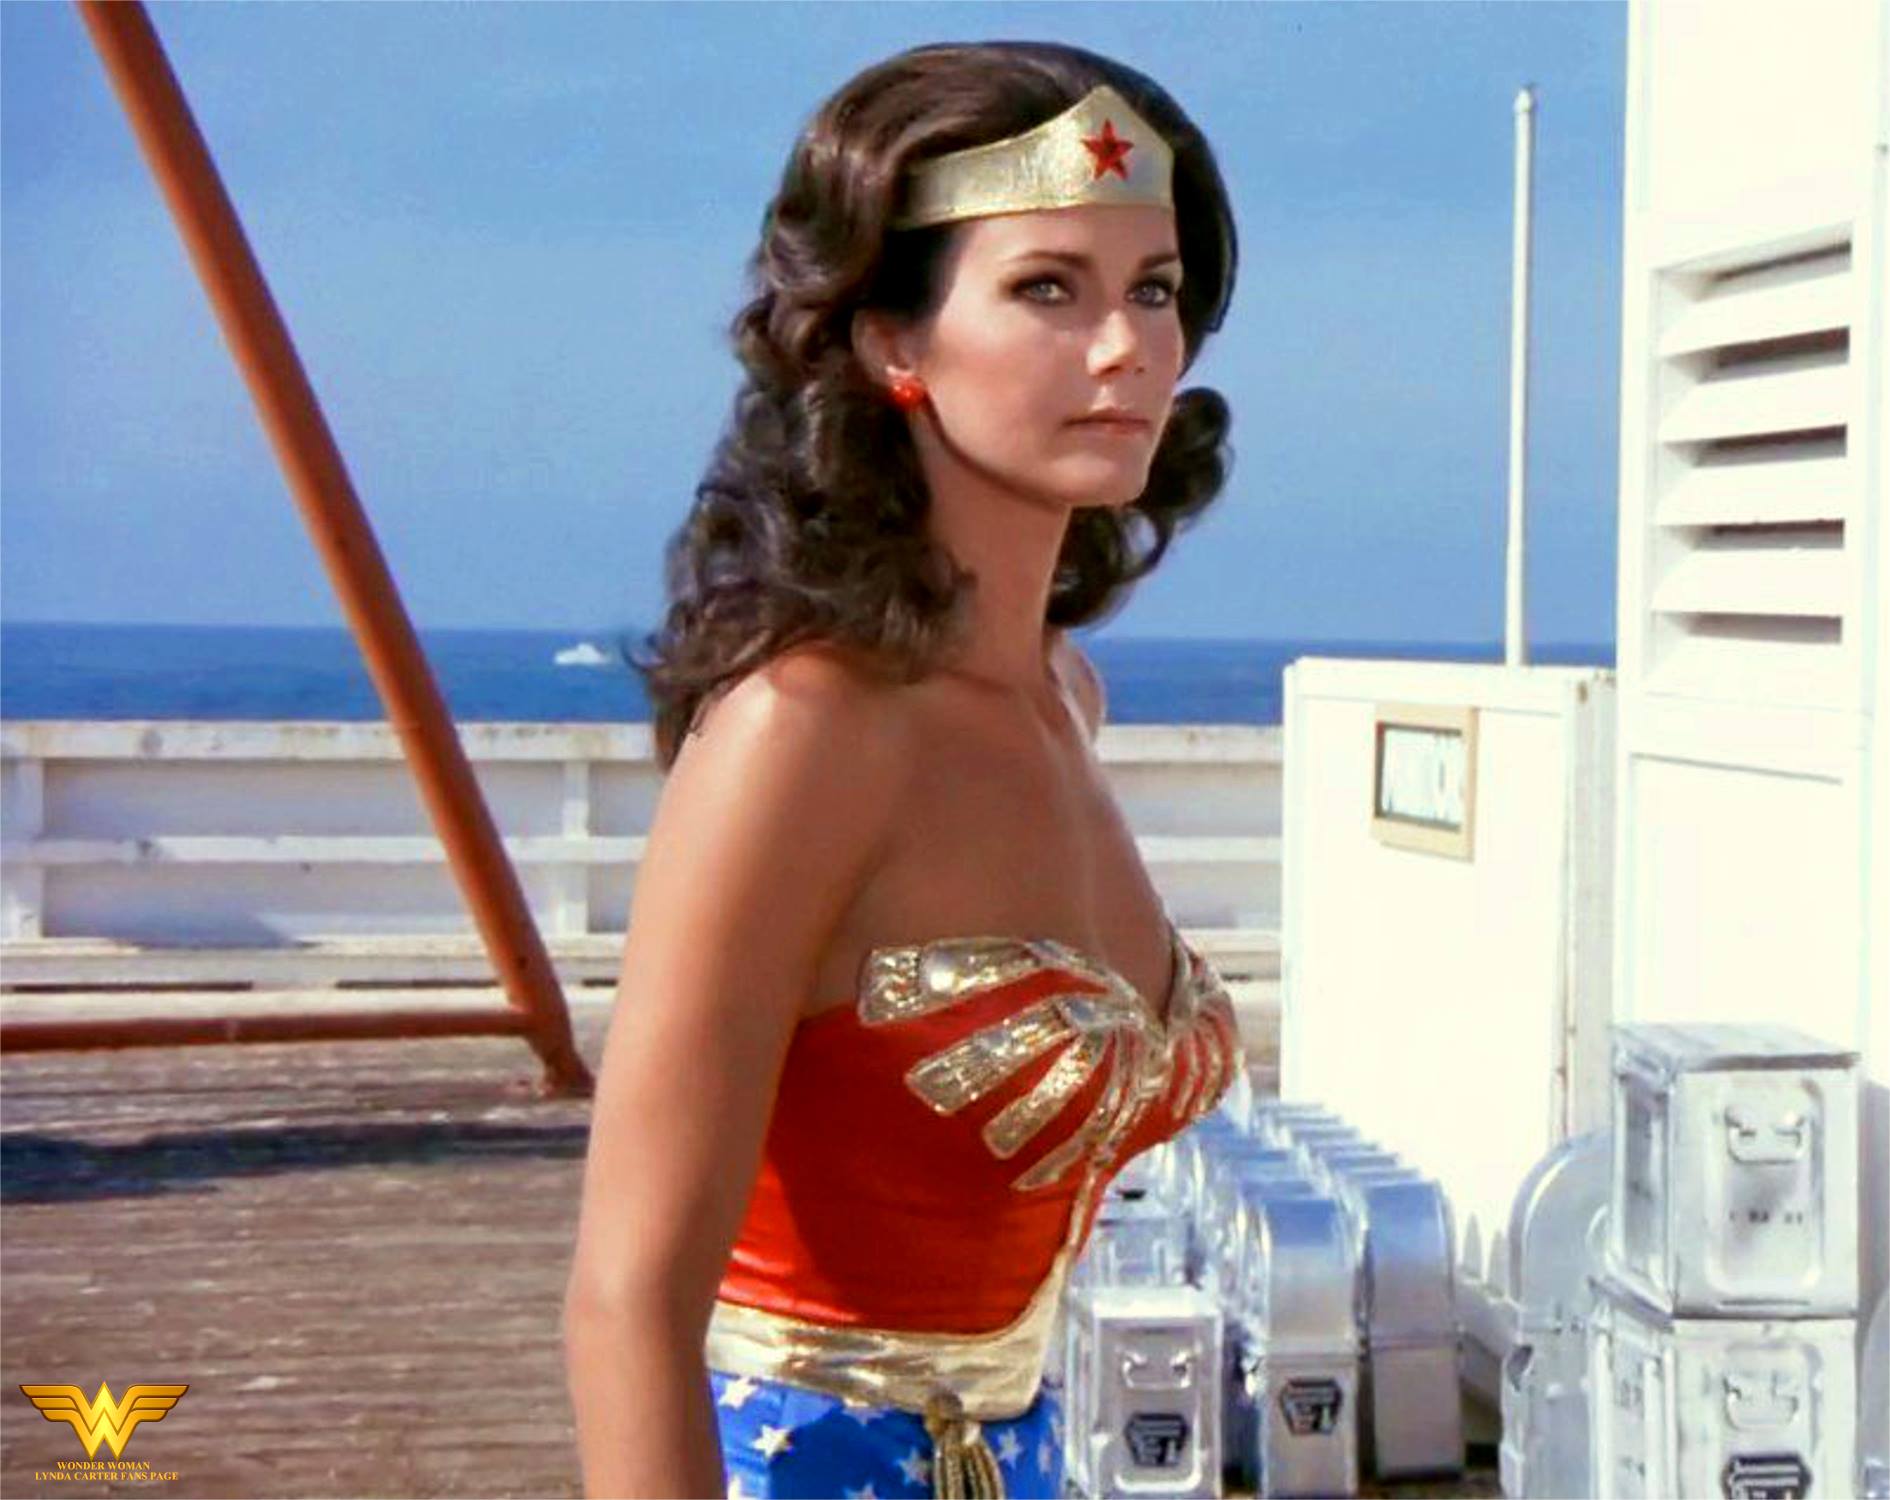 Wonder Woman was one of the many TV characters to visit the mysterious Bermuda Triangle.